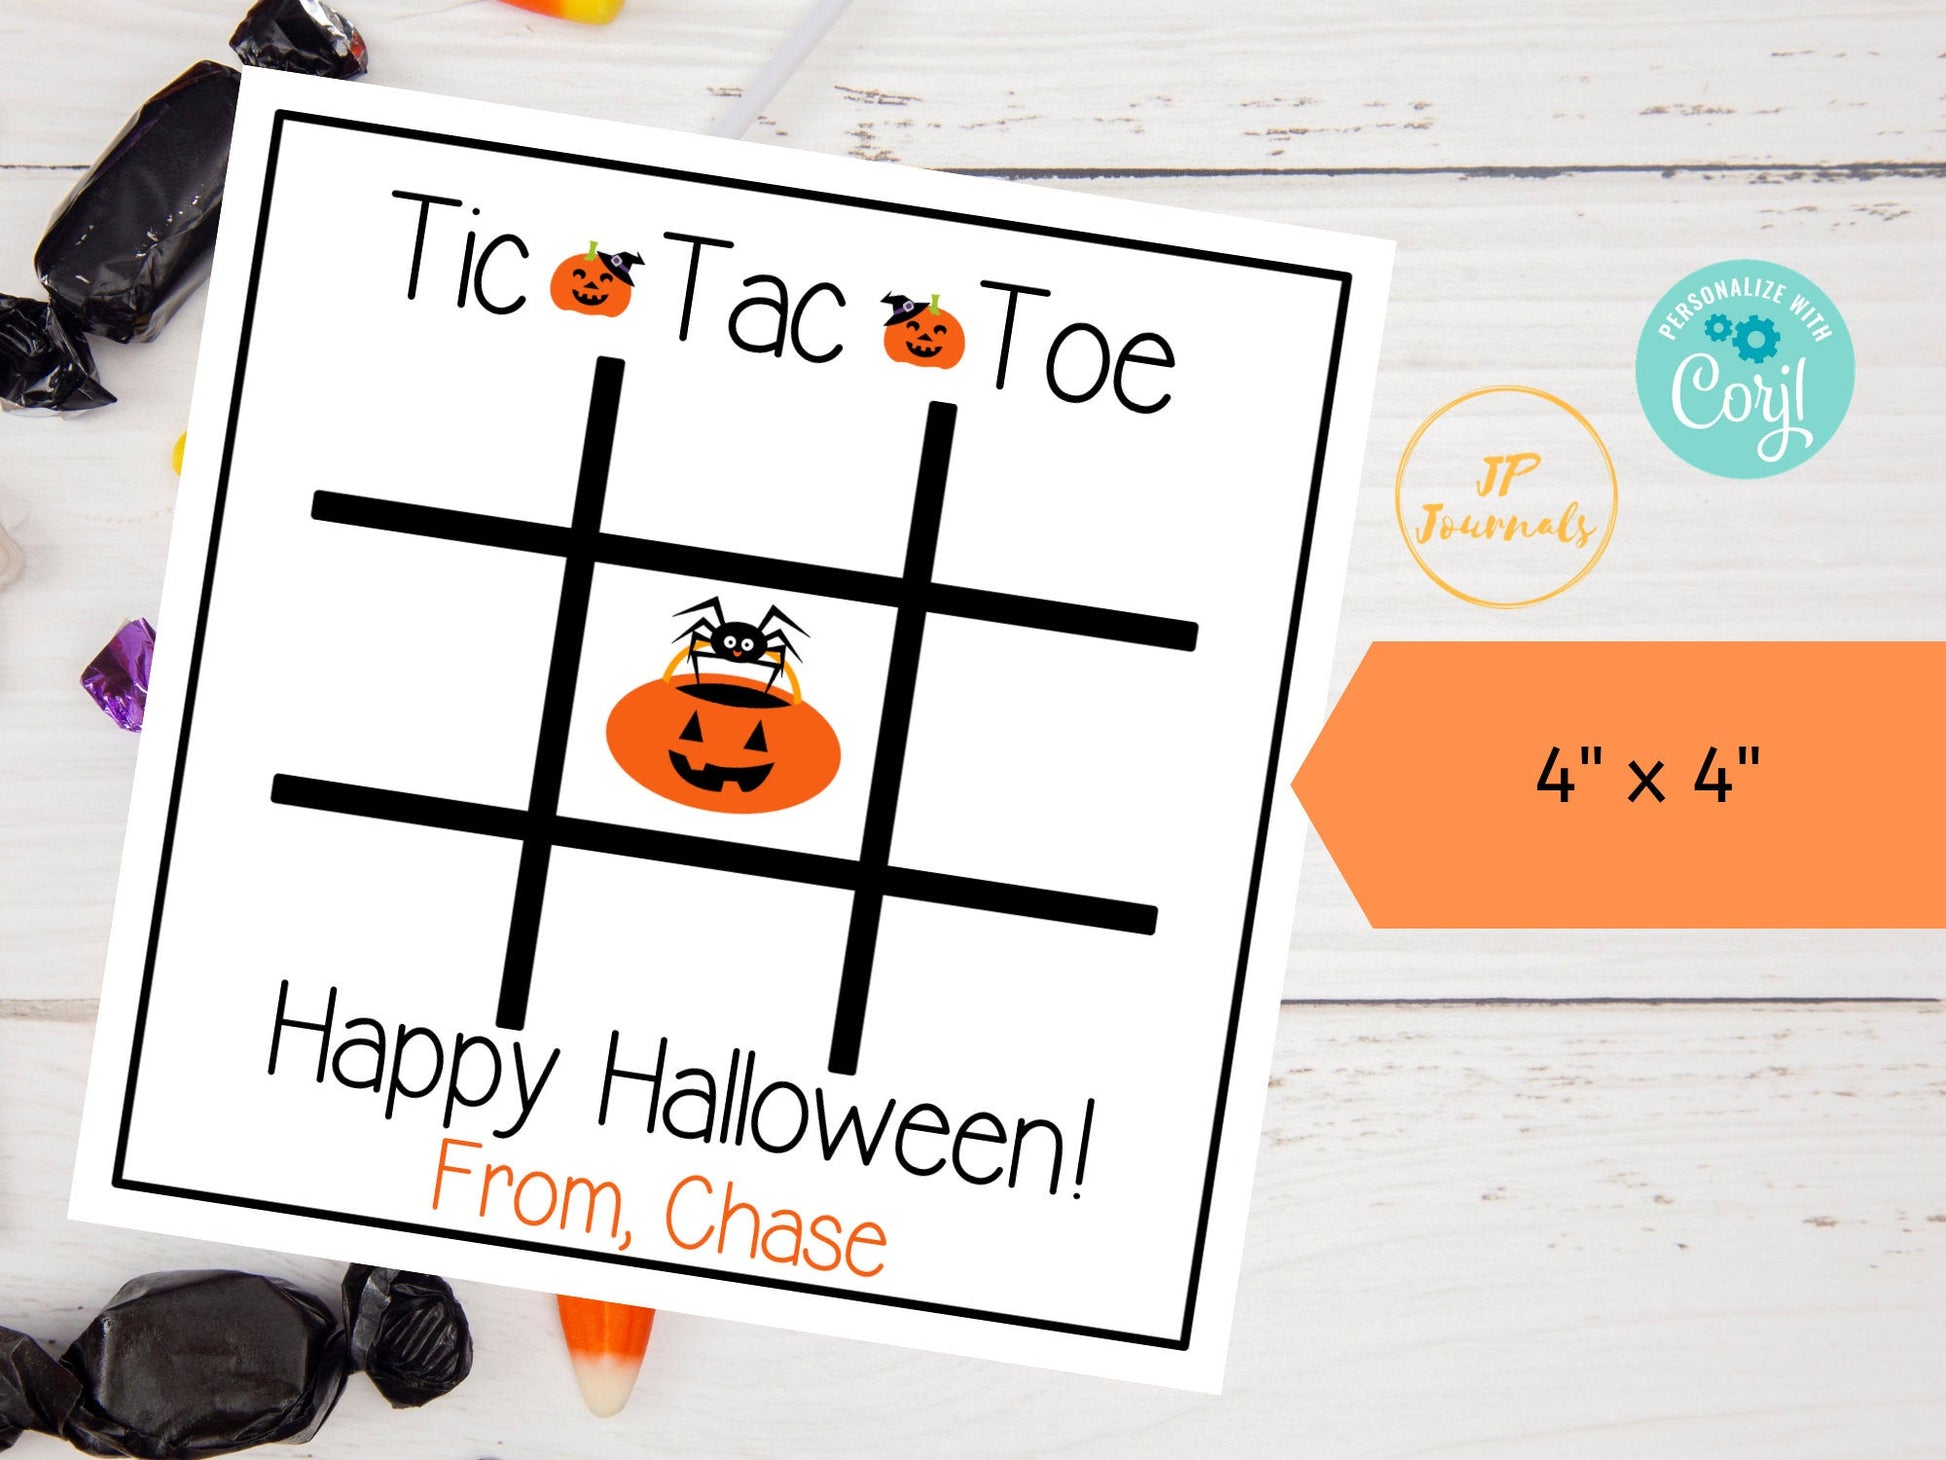 Personalized Halloween Tic Tac Toe Game Card - Printable Halloween Party Favor 